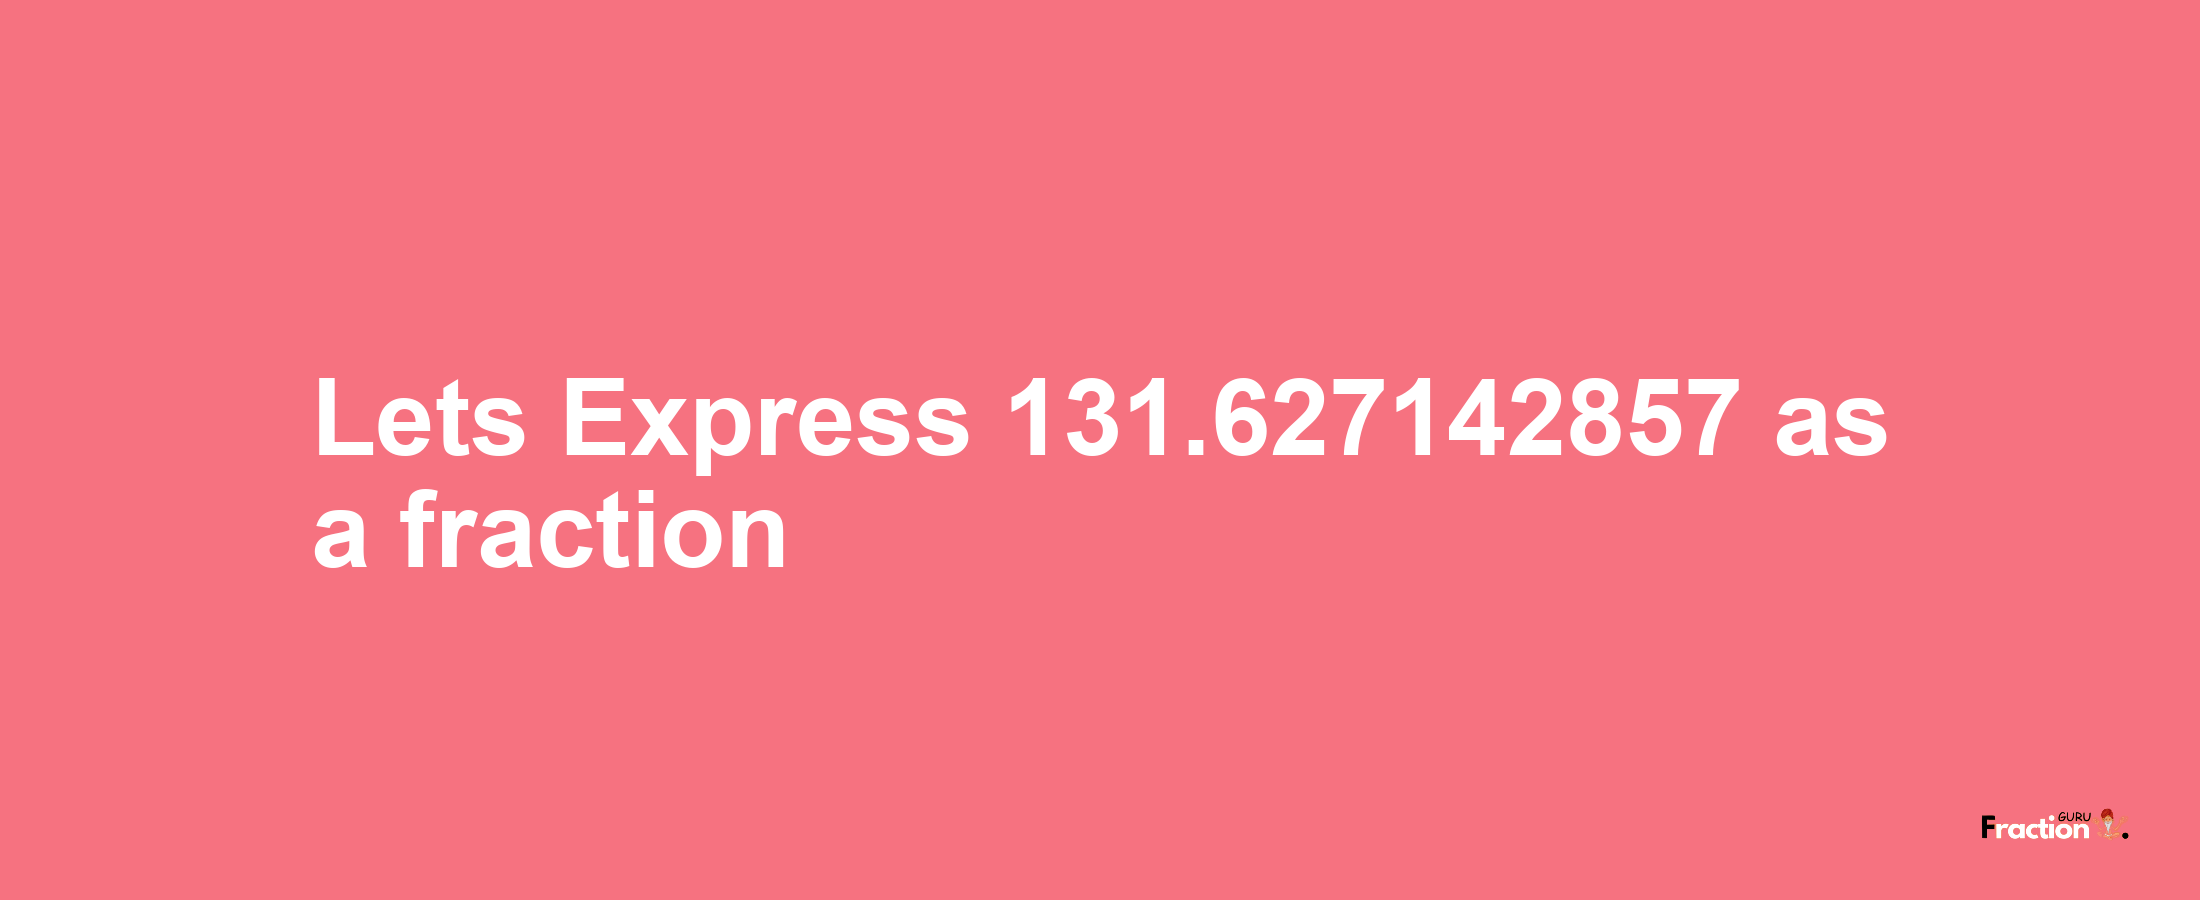 Lets Express 131.627142857 as afraction